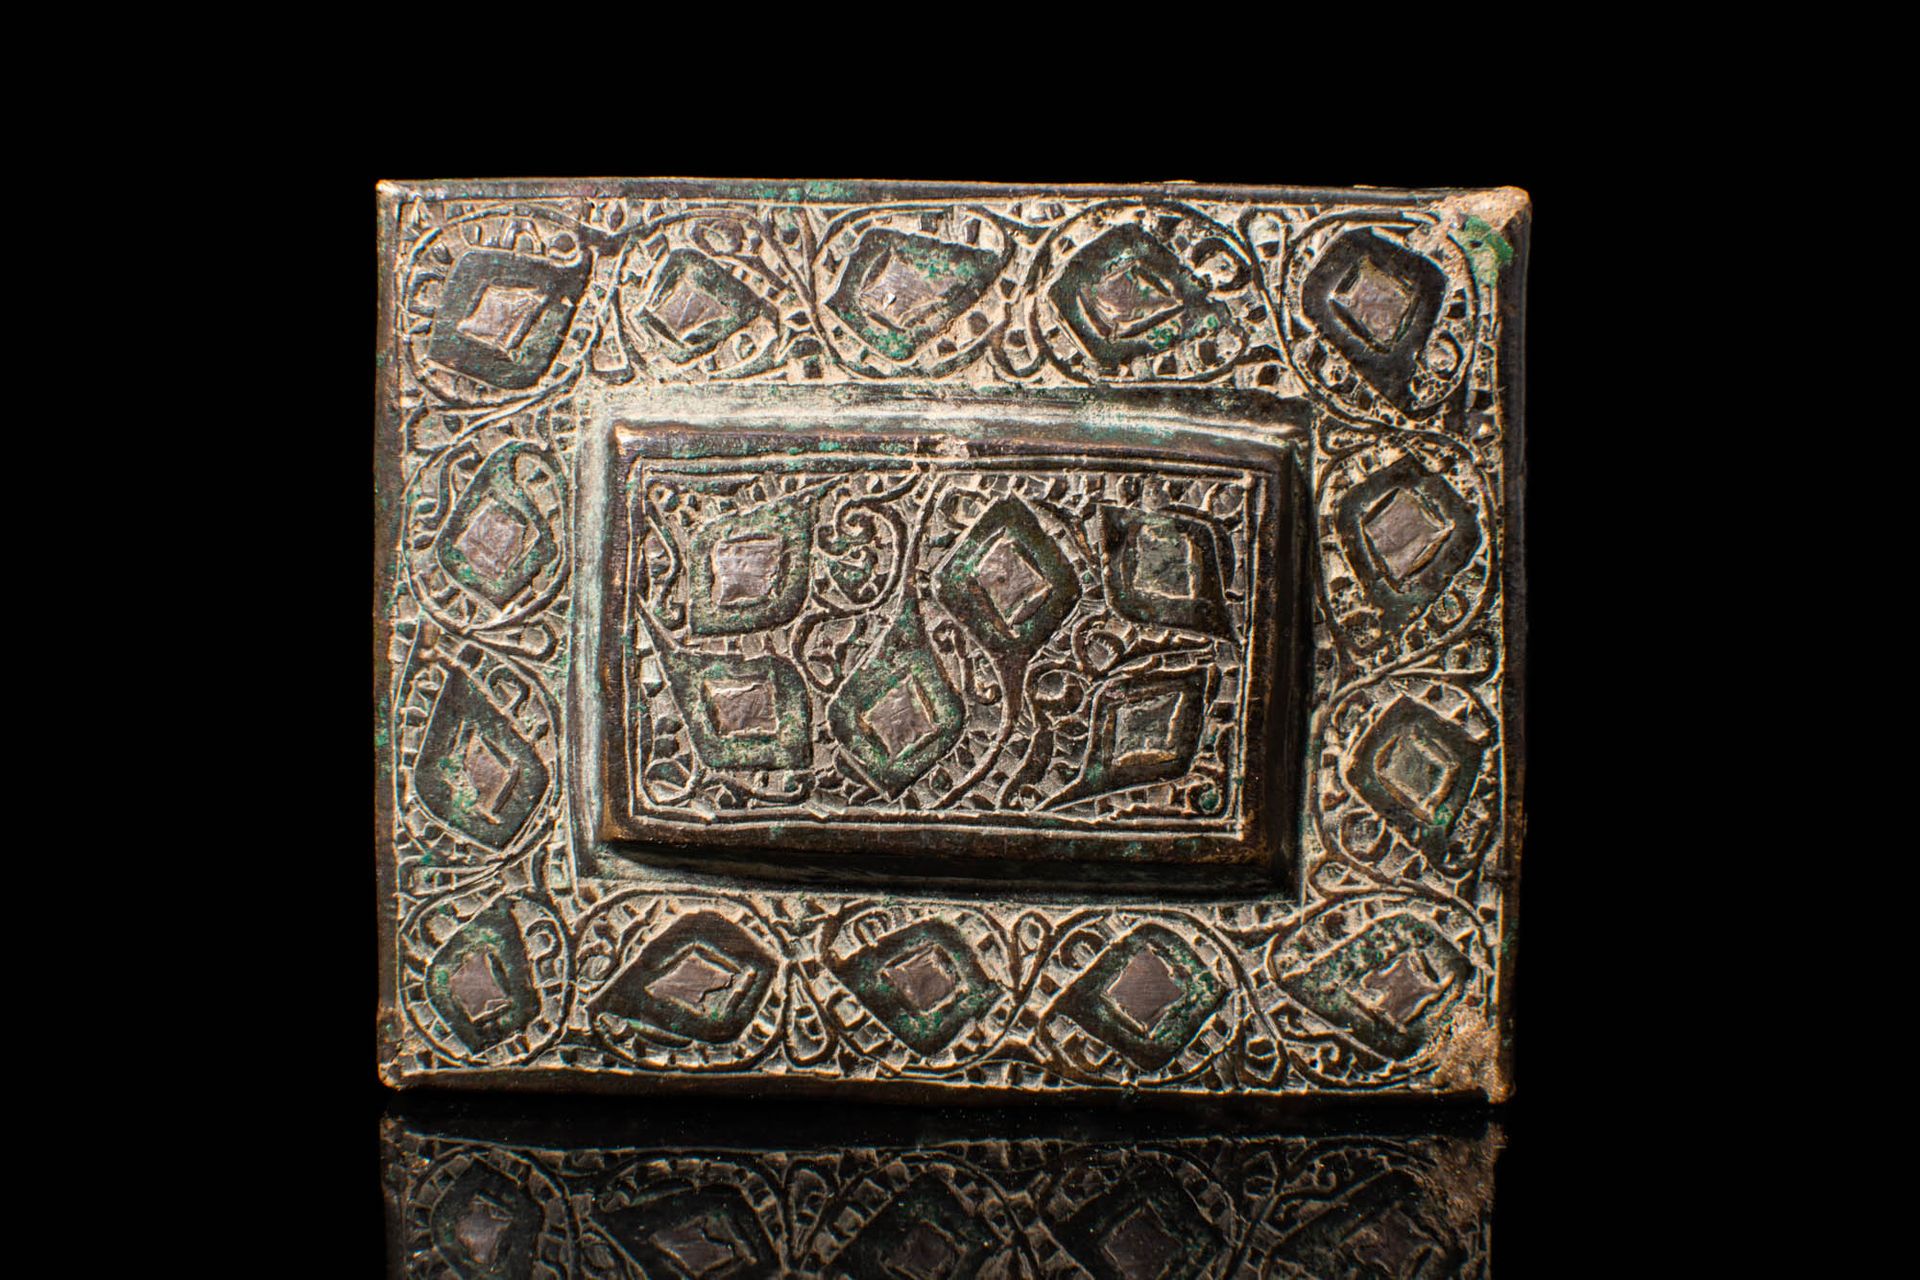 SAFAVID BOX COVER DECORATED WITH FLORAL MOTIFS Ca. AD 1500 - 1600.
Safawidischer&hellip;